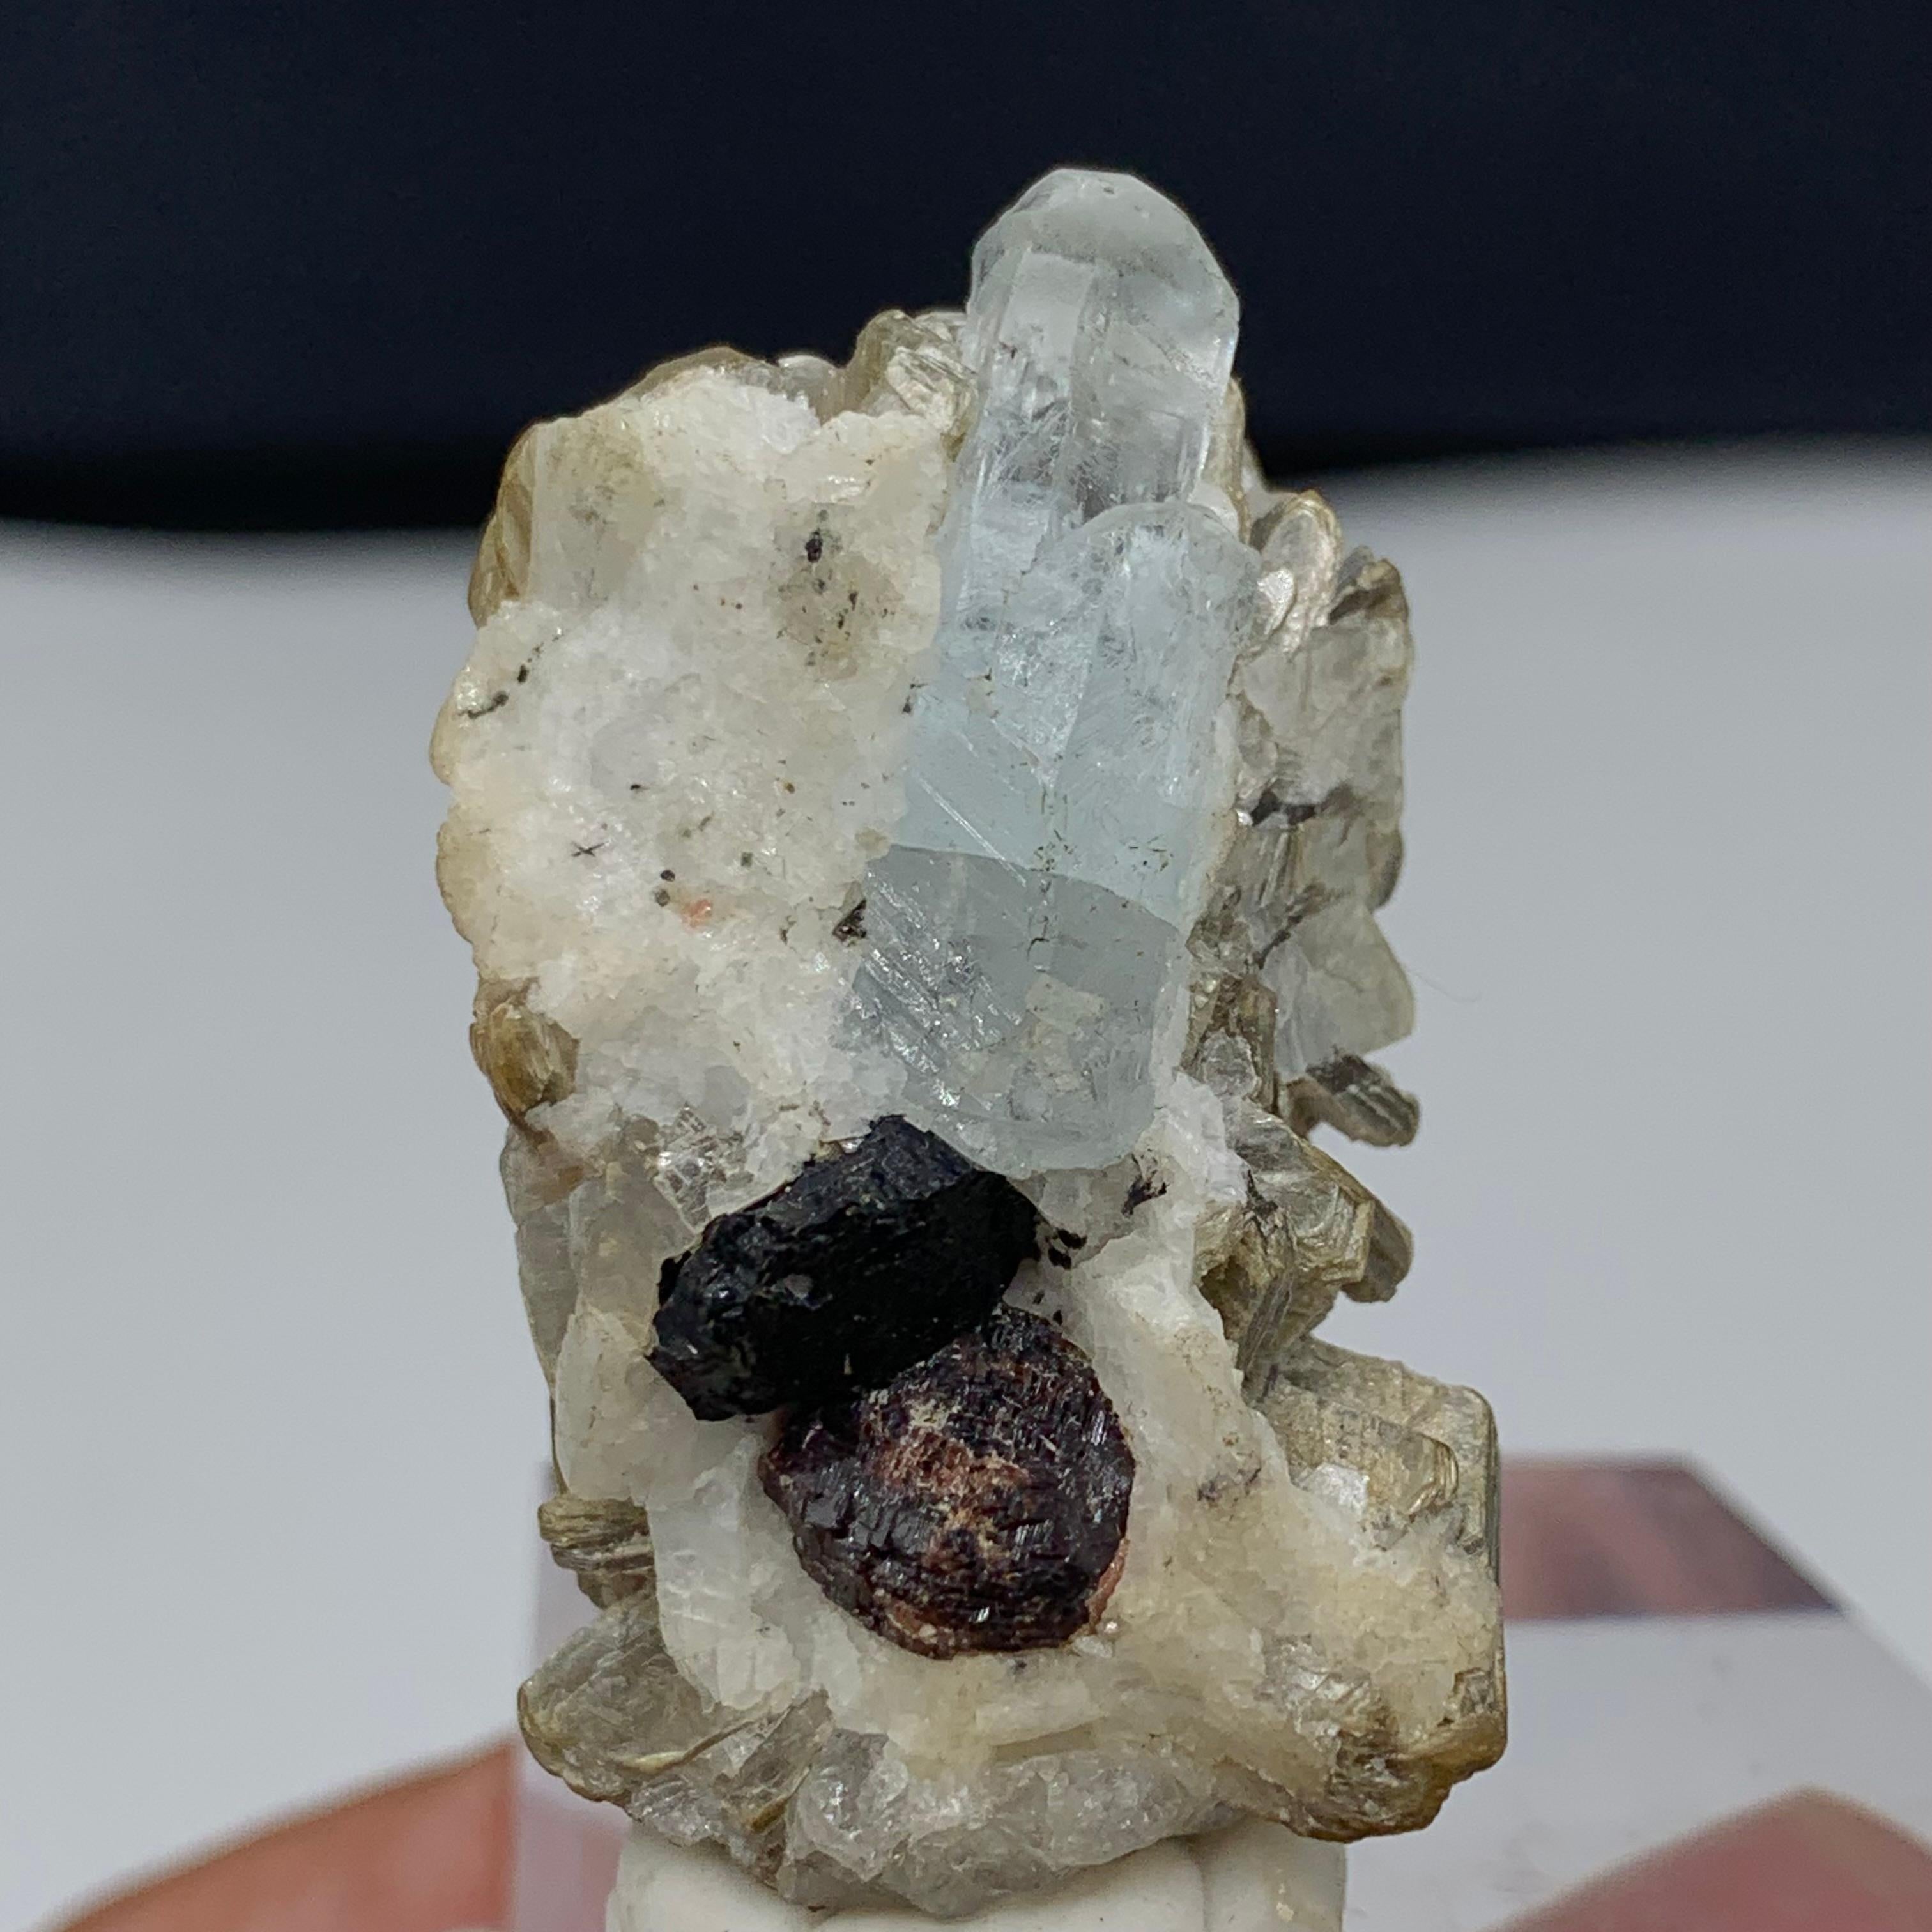 22.75 Gram Gorgeous Aquamarine Specimen Attach With Garnet And Muscovite 
Weight: 22.75 Gram
Dimension: 4.2 x 2.5 x 2.2 Cm
Origin: Skardu, Pakistan 

Aquamarine is a pale-blue to light-green variety of beryl. The color of aquamarine can be changed